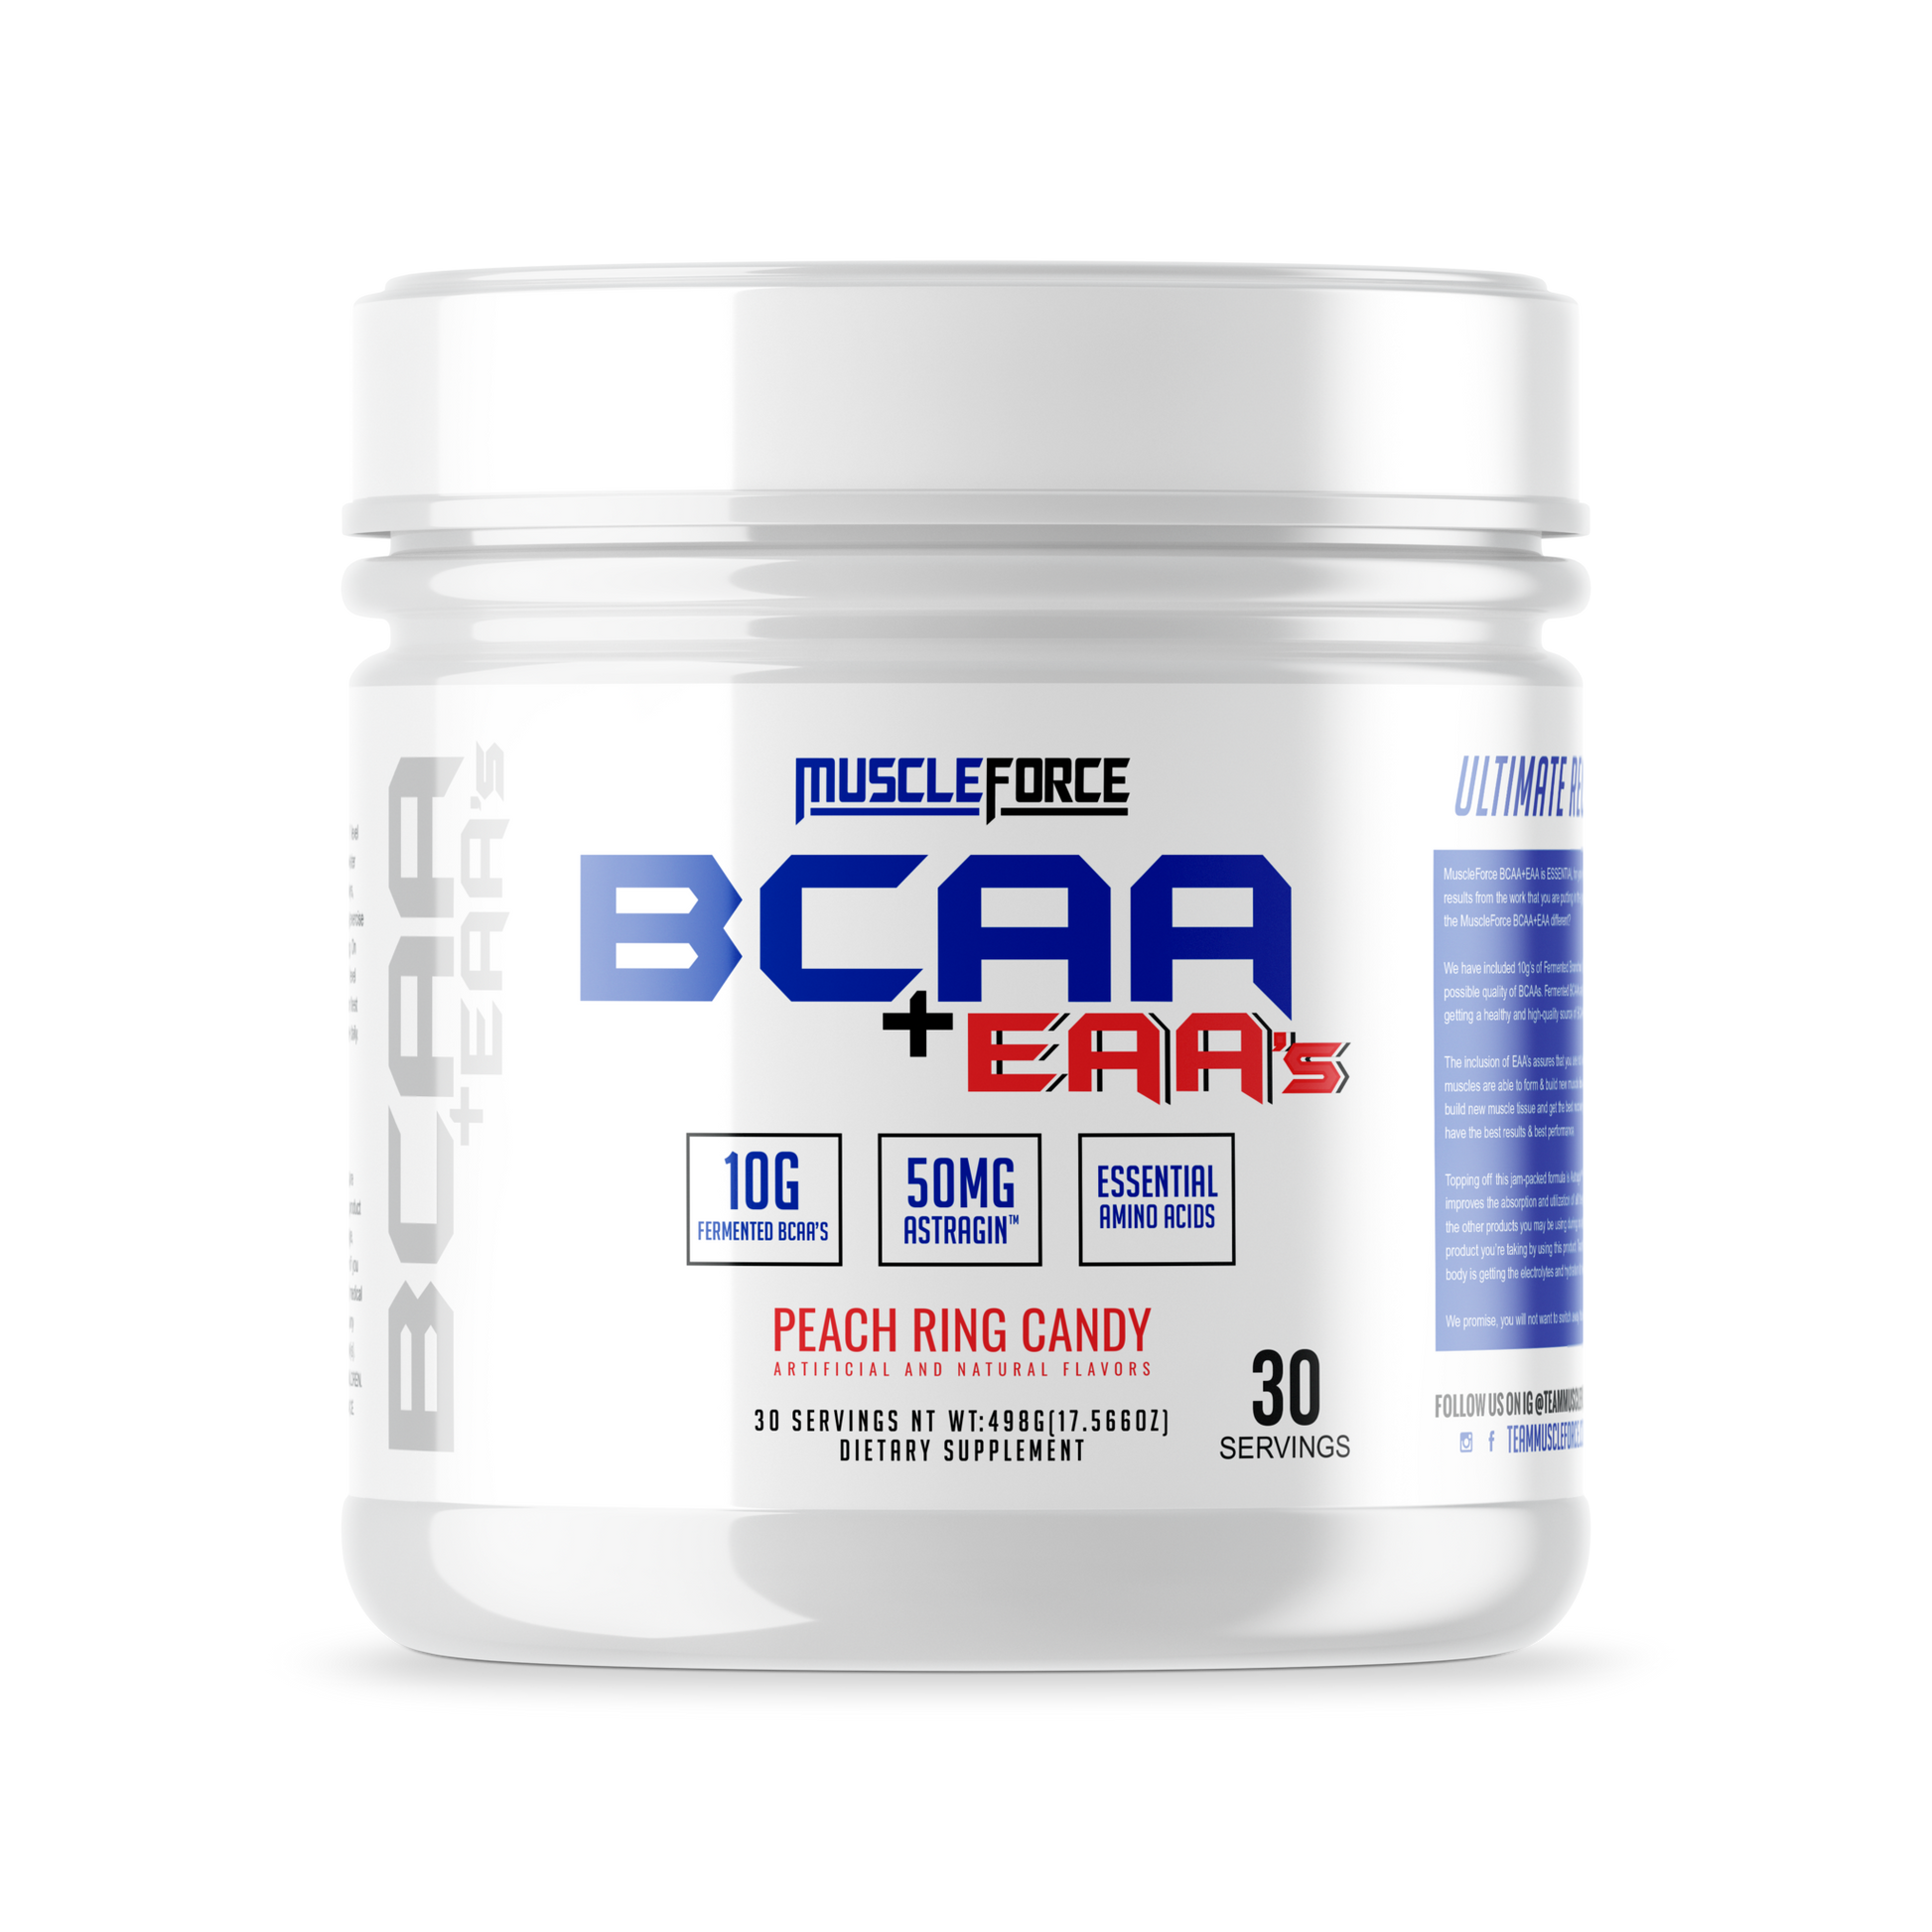 MuscleForce Bcaa+Eaa's Peach Ring Candy